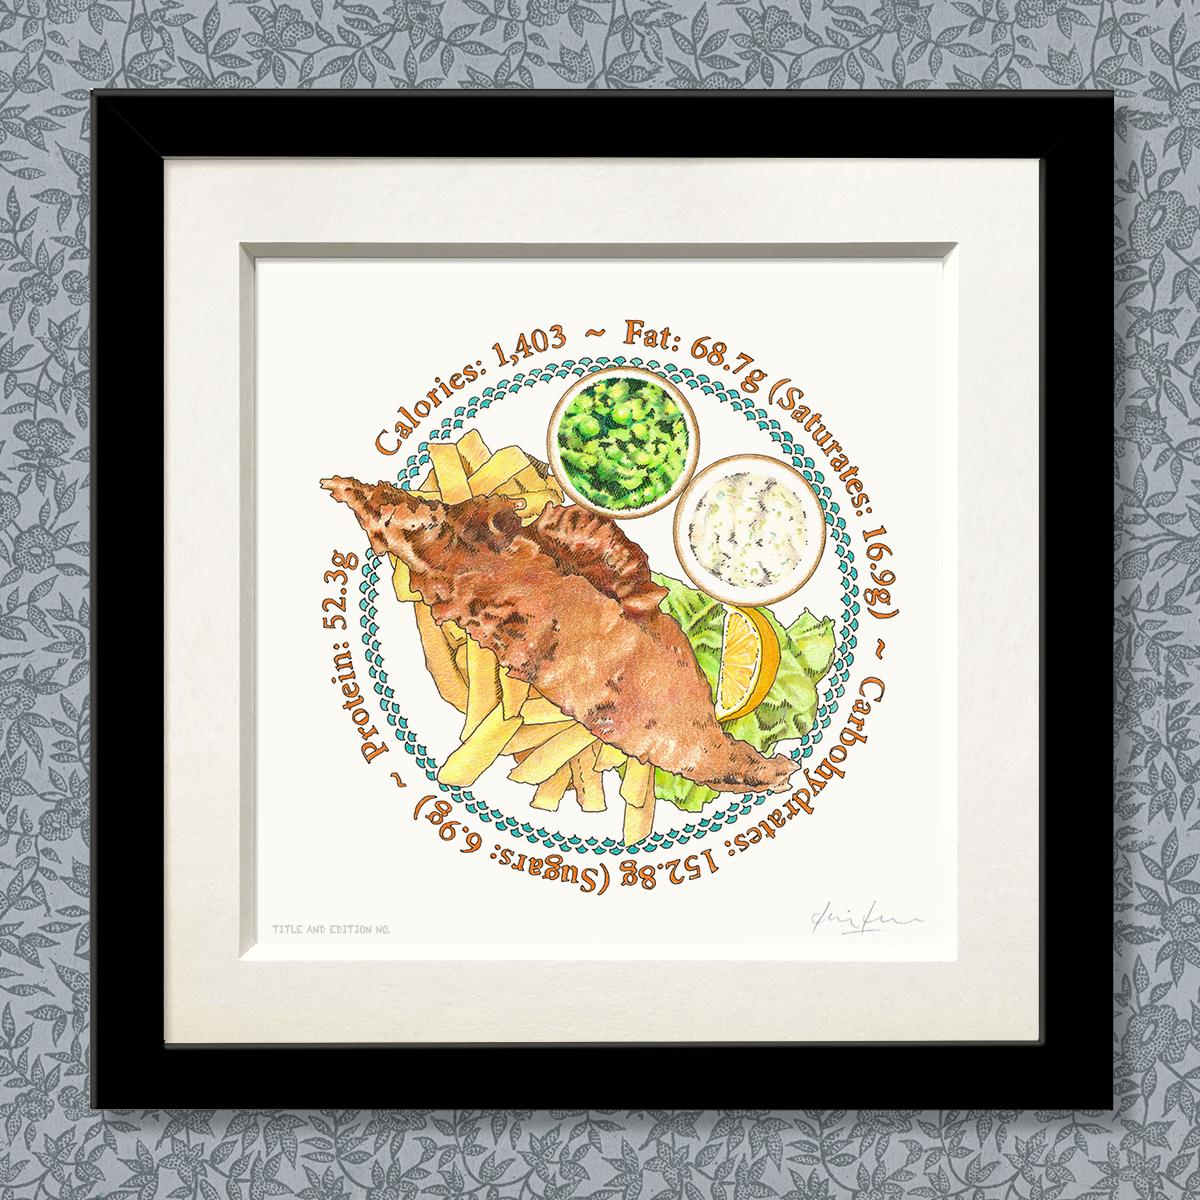 Limited edition print of a coloured drawing of a plate of fish and chips, in a black frame.